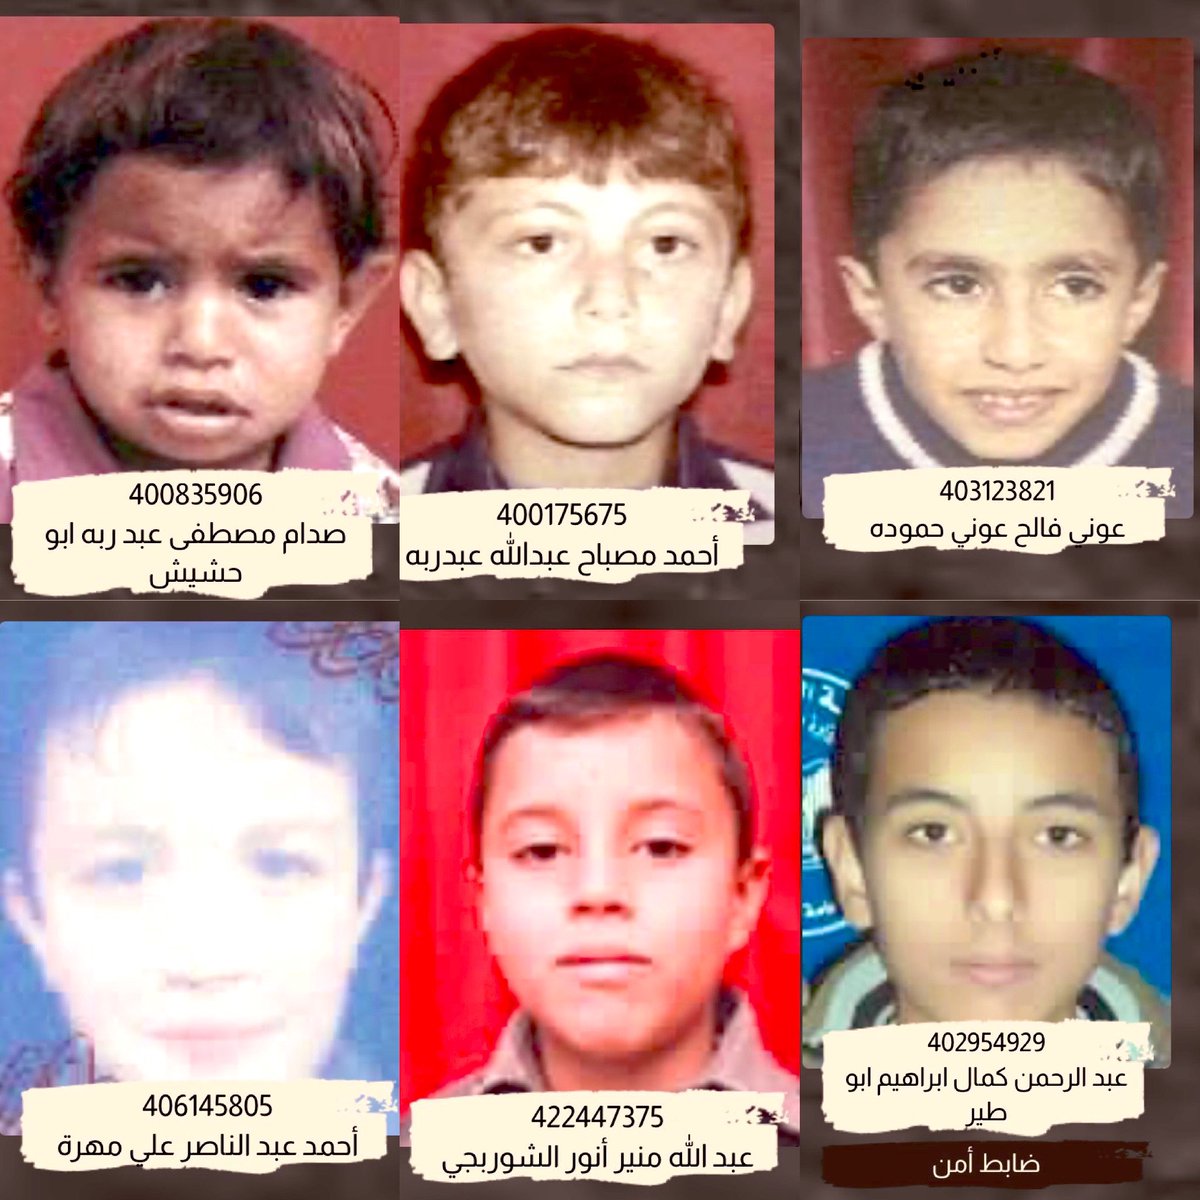 The Israeli occupation drops leaflets on Gaza featuring pictures of dozens of Palestinians whom they claim are affiliated with Hamas. Among these pictures are images of young Palestinian children, who are being blackmailed and threatened with death if they do not come forward to